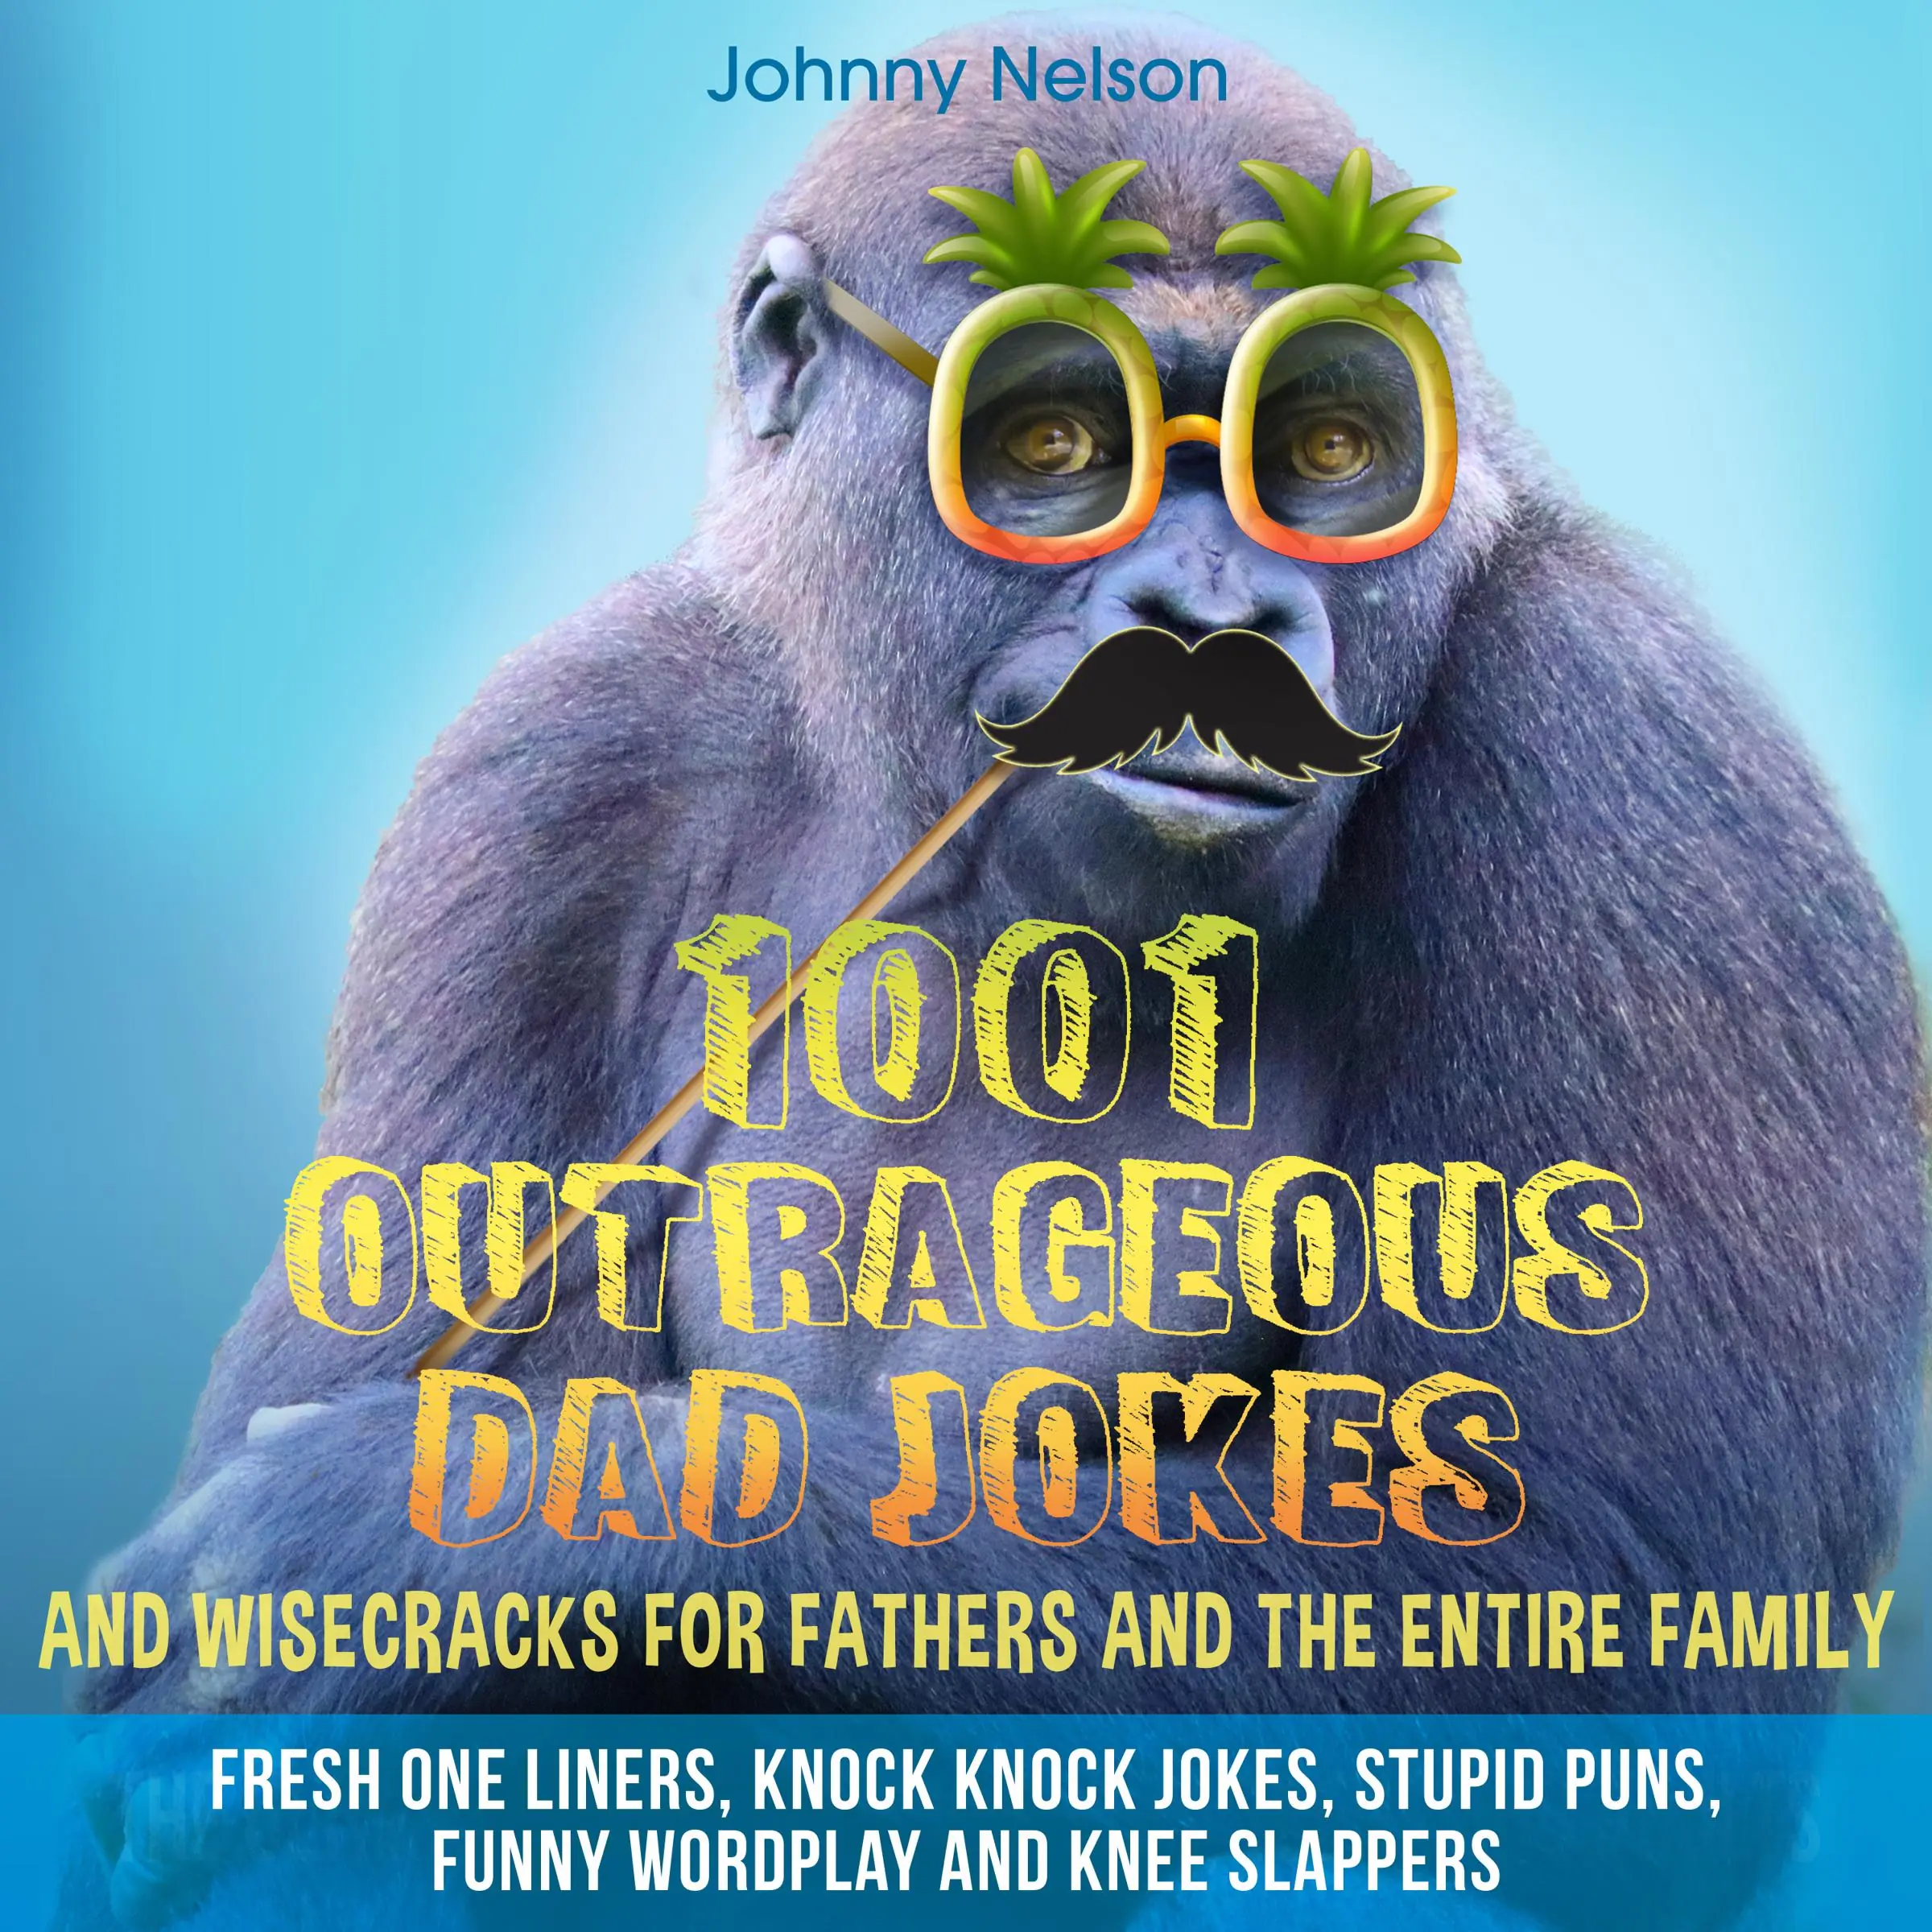 1001 Outrageous Dad Jokes and Wisecracks for Fathers and the entire family Audiobook by Johnny Nelson